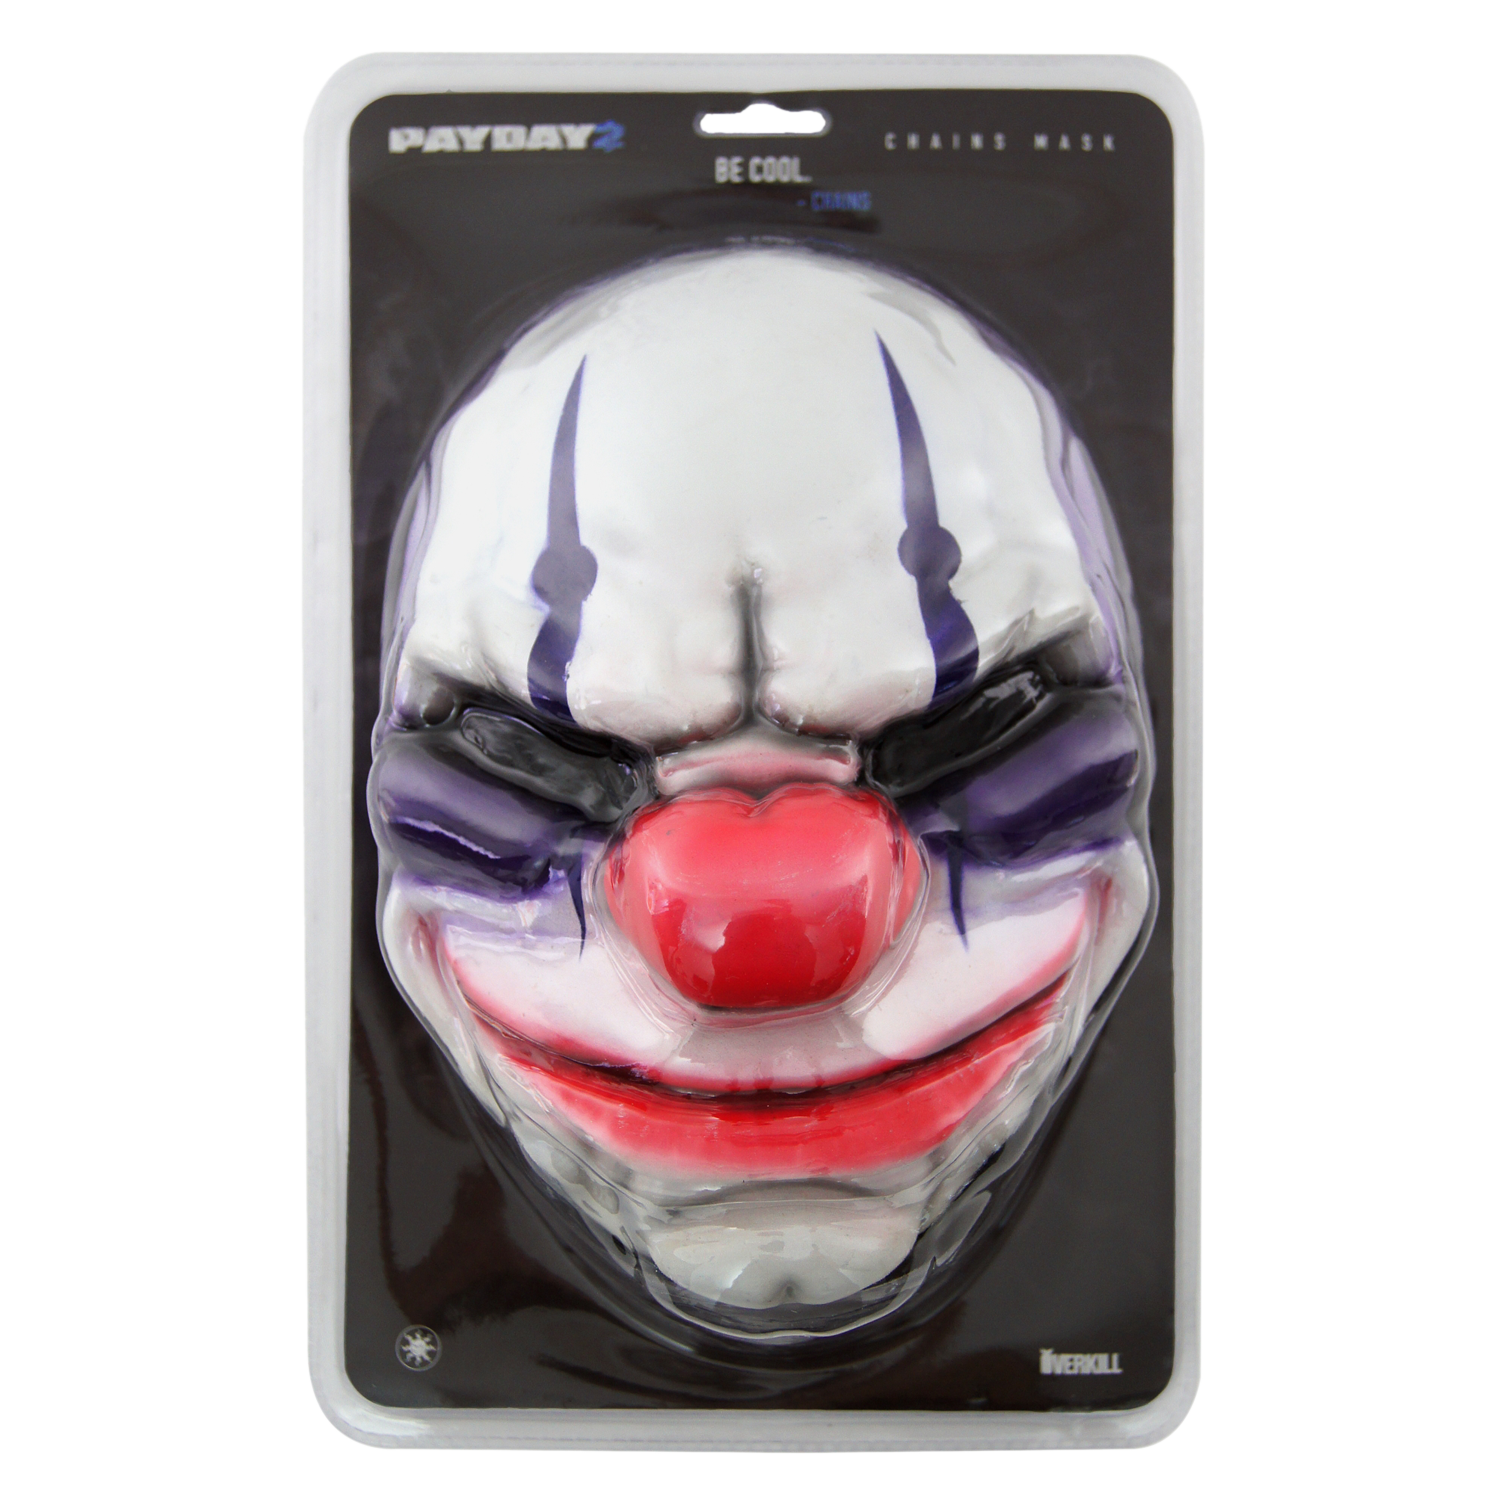 2 | Replica Mask "Chains" The official Payday 2 Merch Store